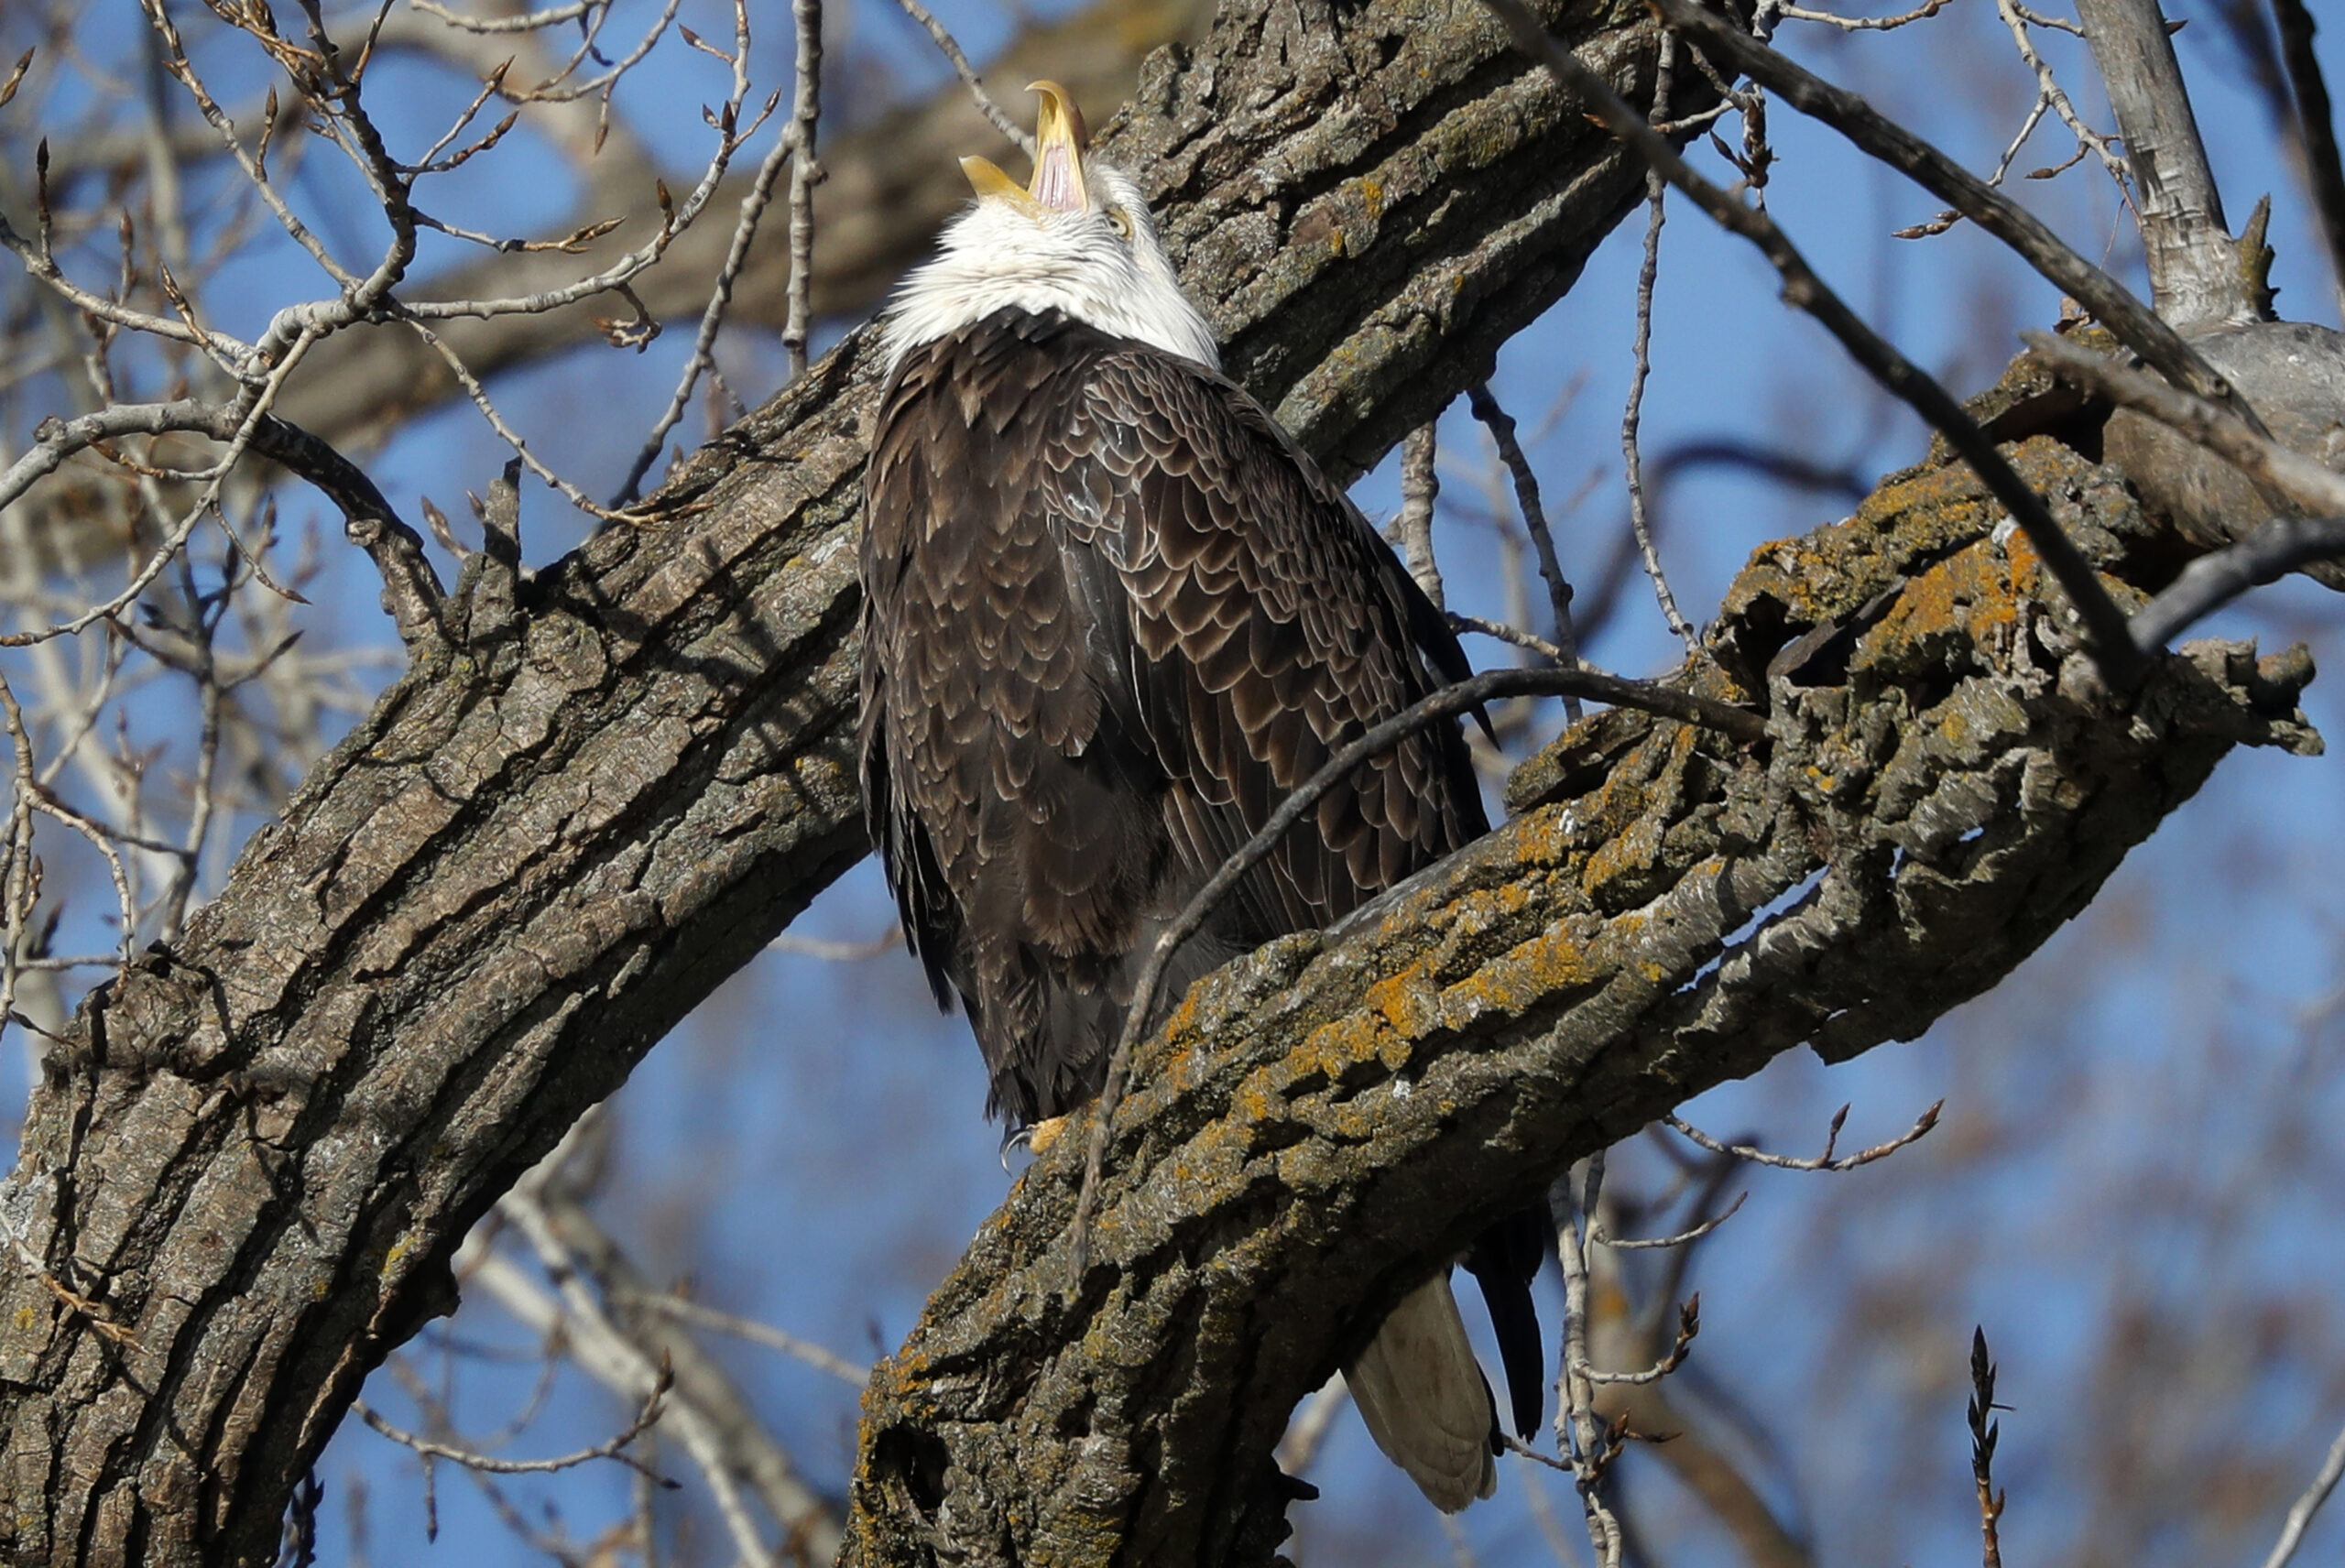 Raptors To Be Released During Eagle-Watching Event